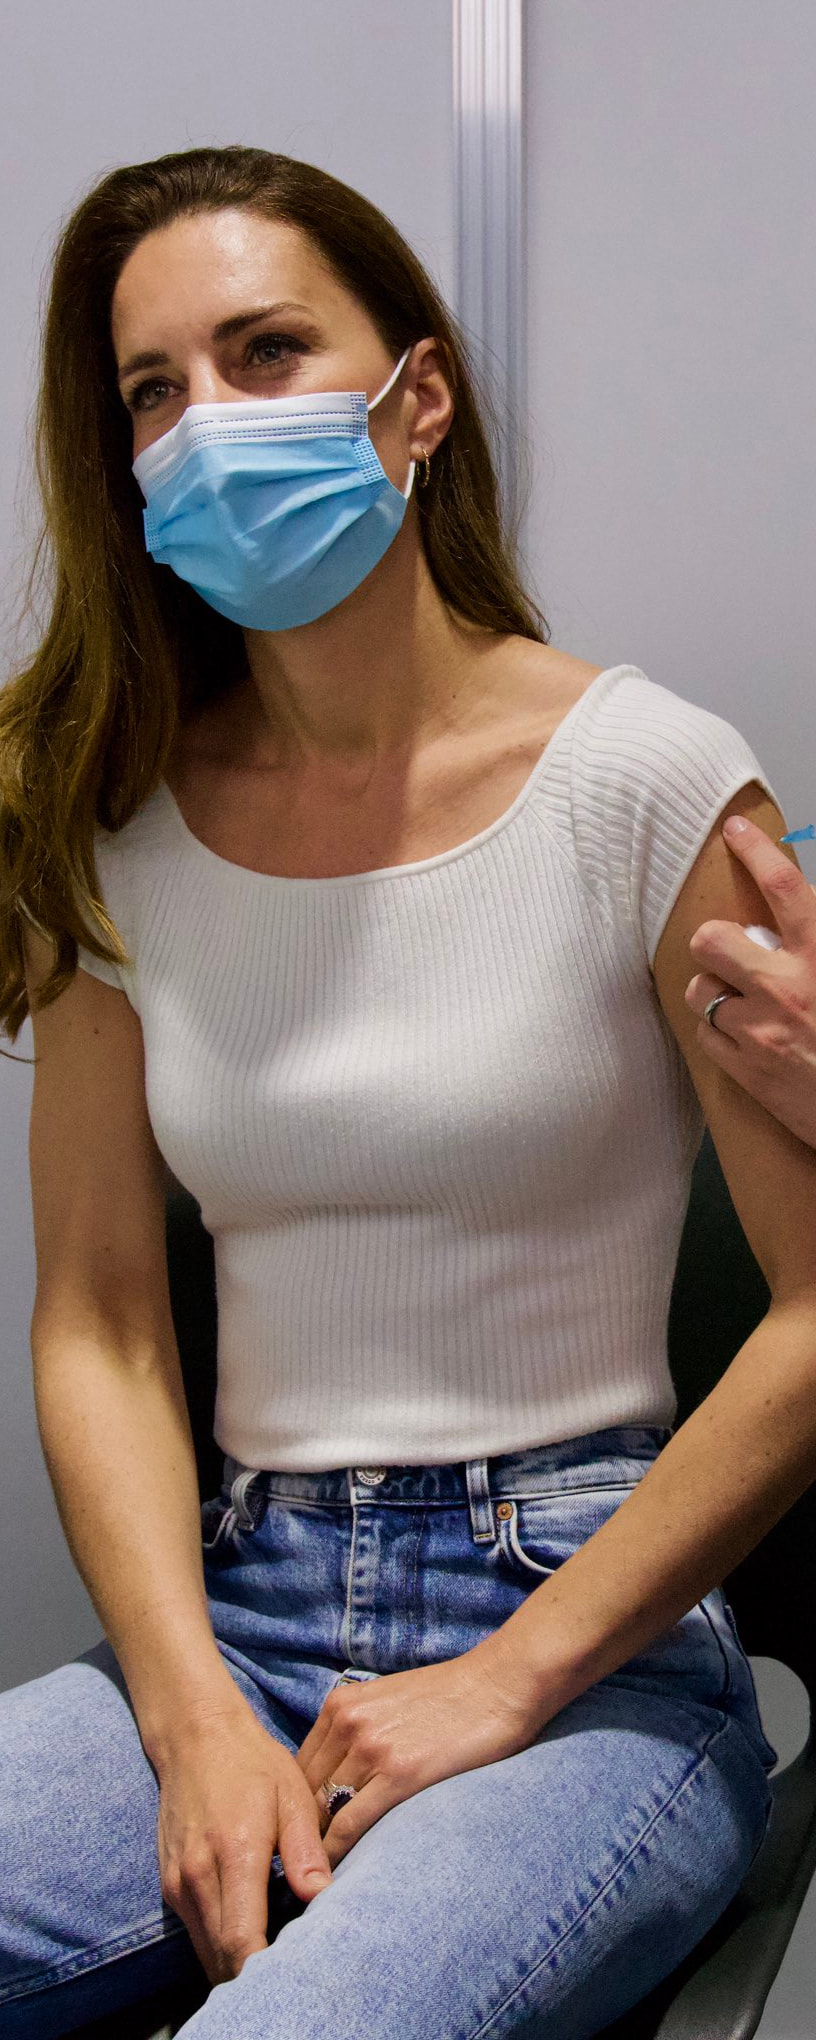 The Duchess of Cambridge recieved her first COVID-19 vaccine shot on 28 May 2021